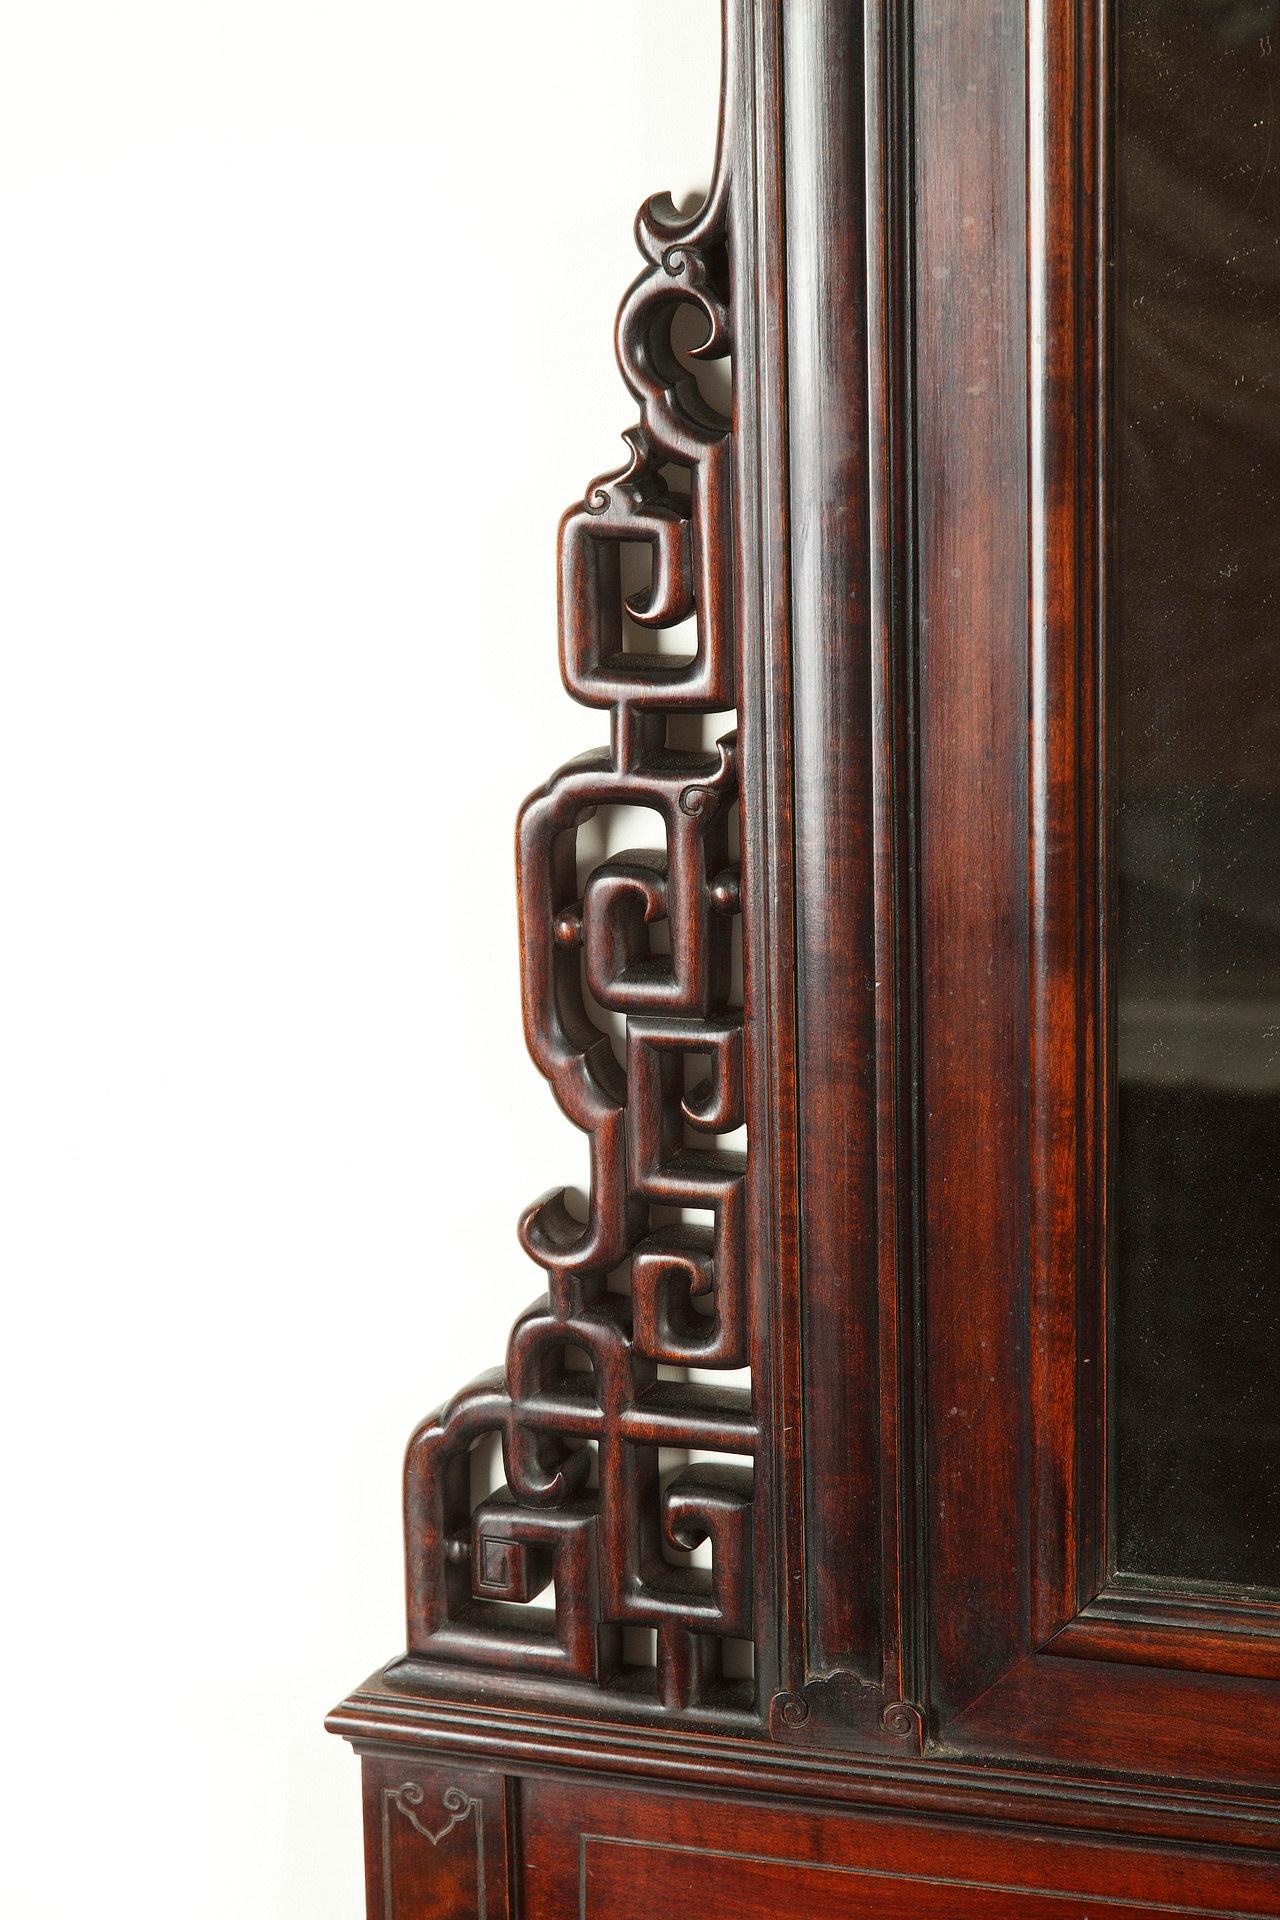 Late 19th Century Japanese Style Carved Wood Coat Hanger by G. Viardot, France, Circa 1880